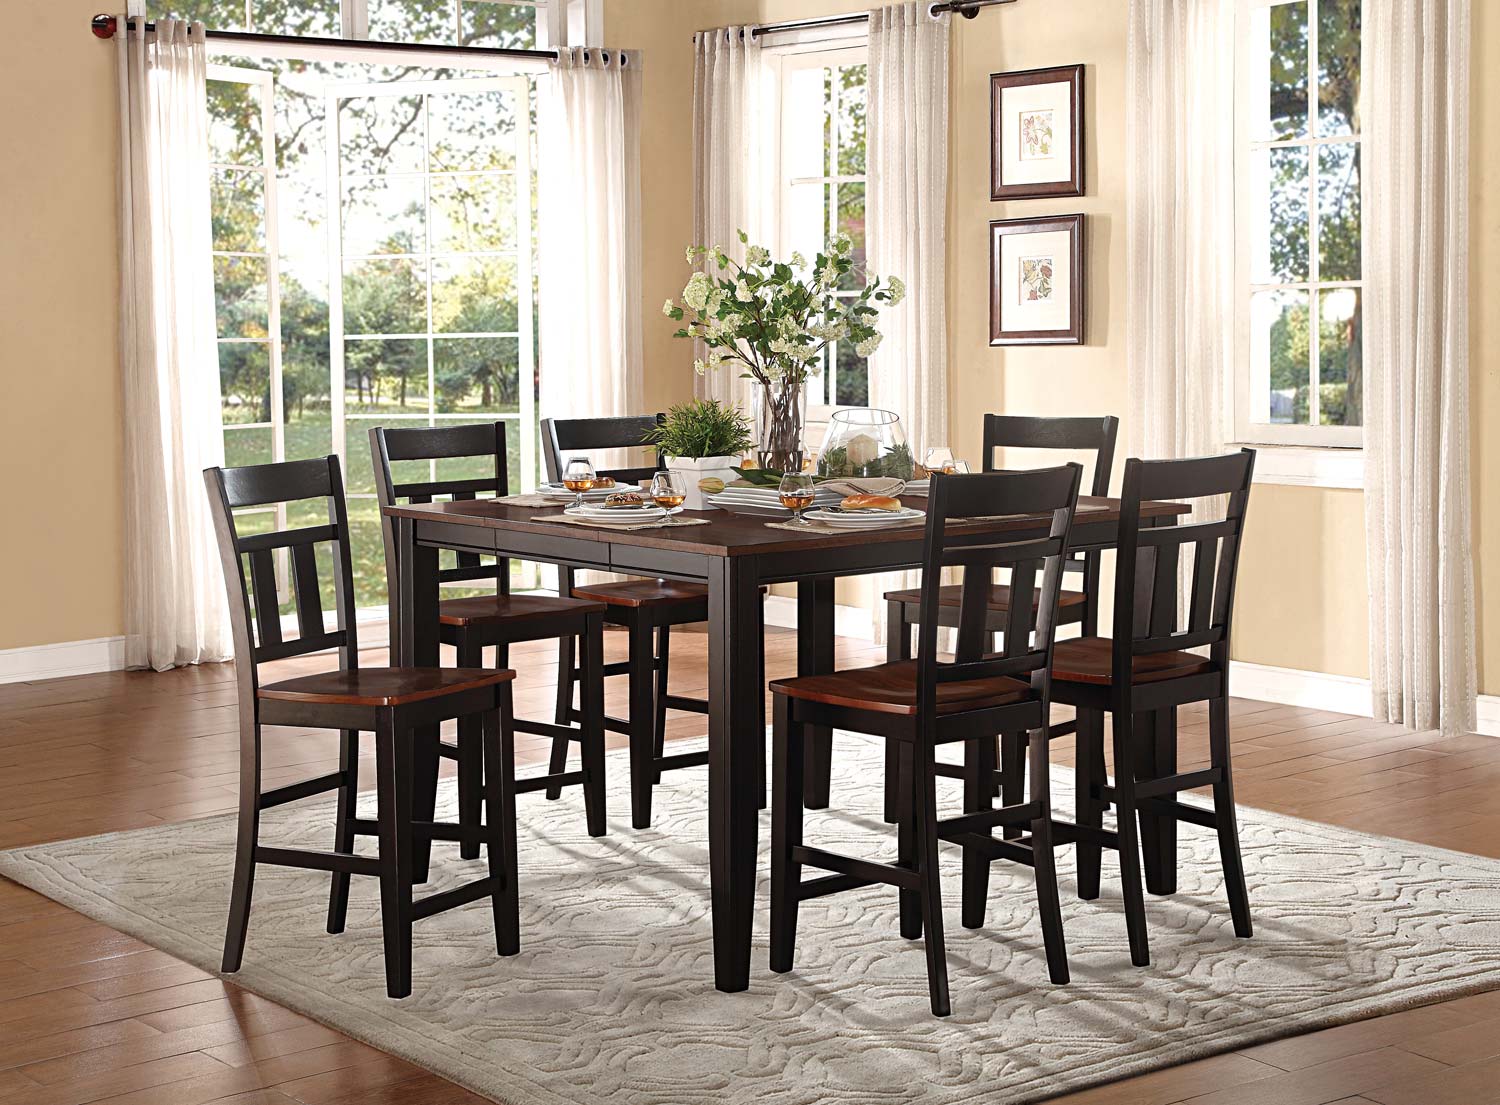 Homelegance Westport Counter Height Dining Set - Two tone black/cherry